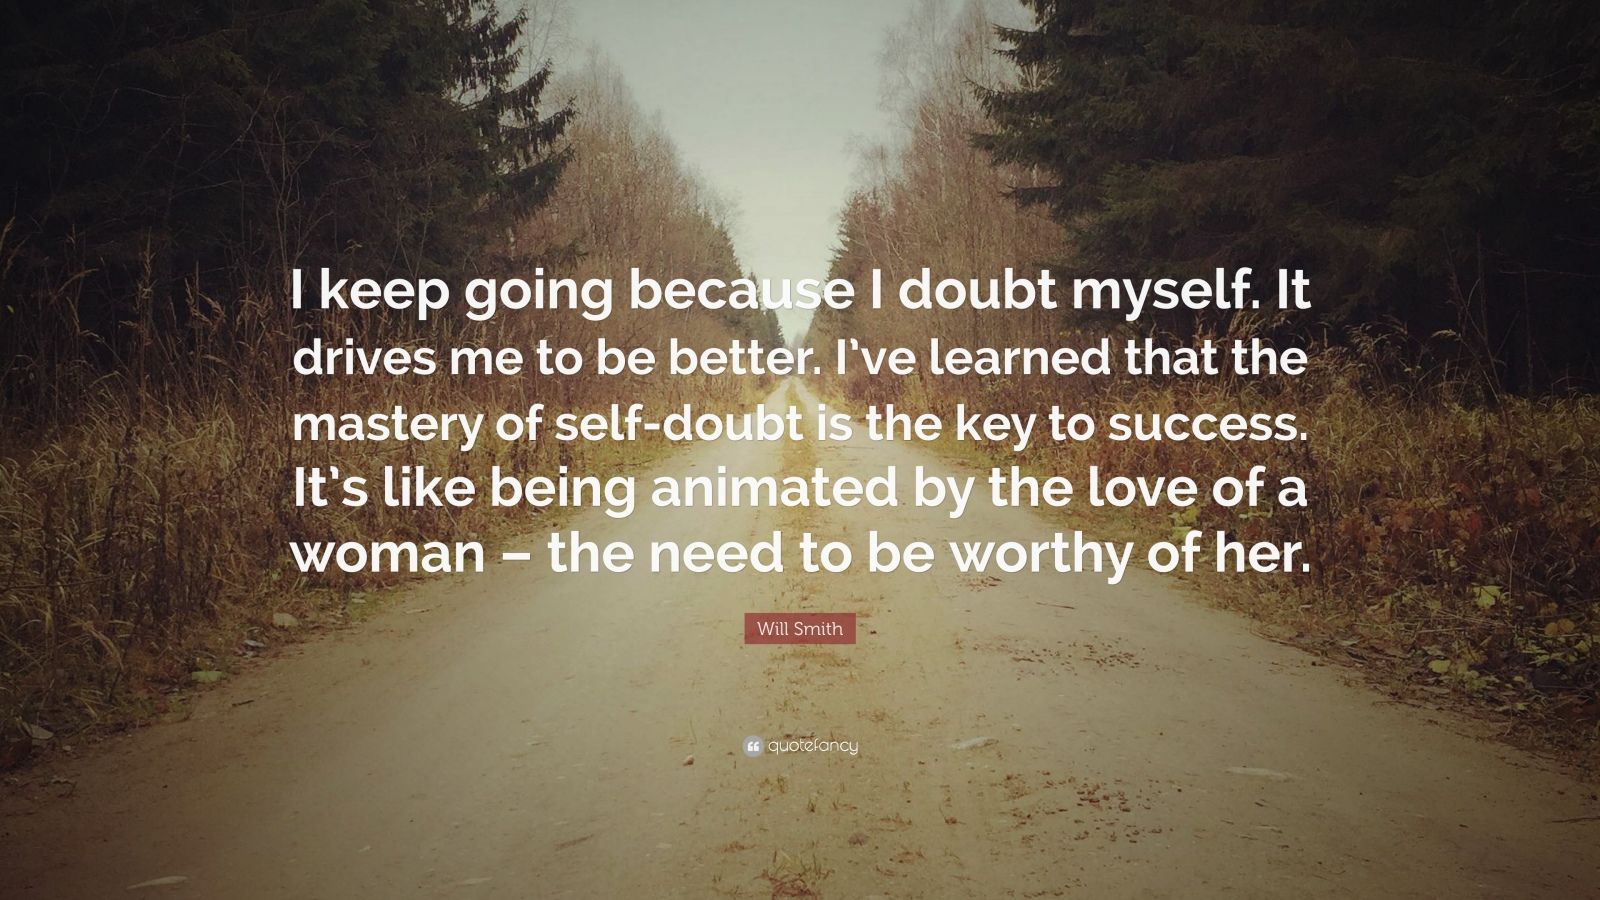 Will Smith Quote “I keep going because I doubt myself It drives me